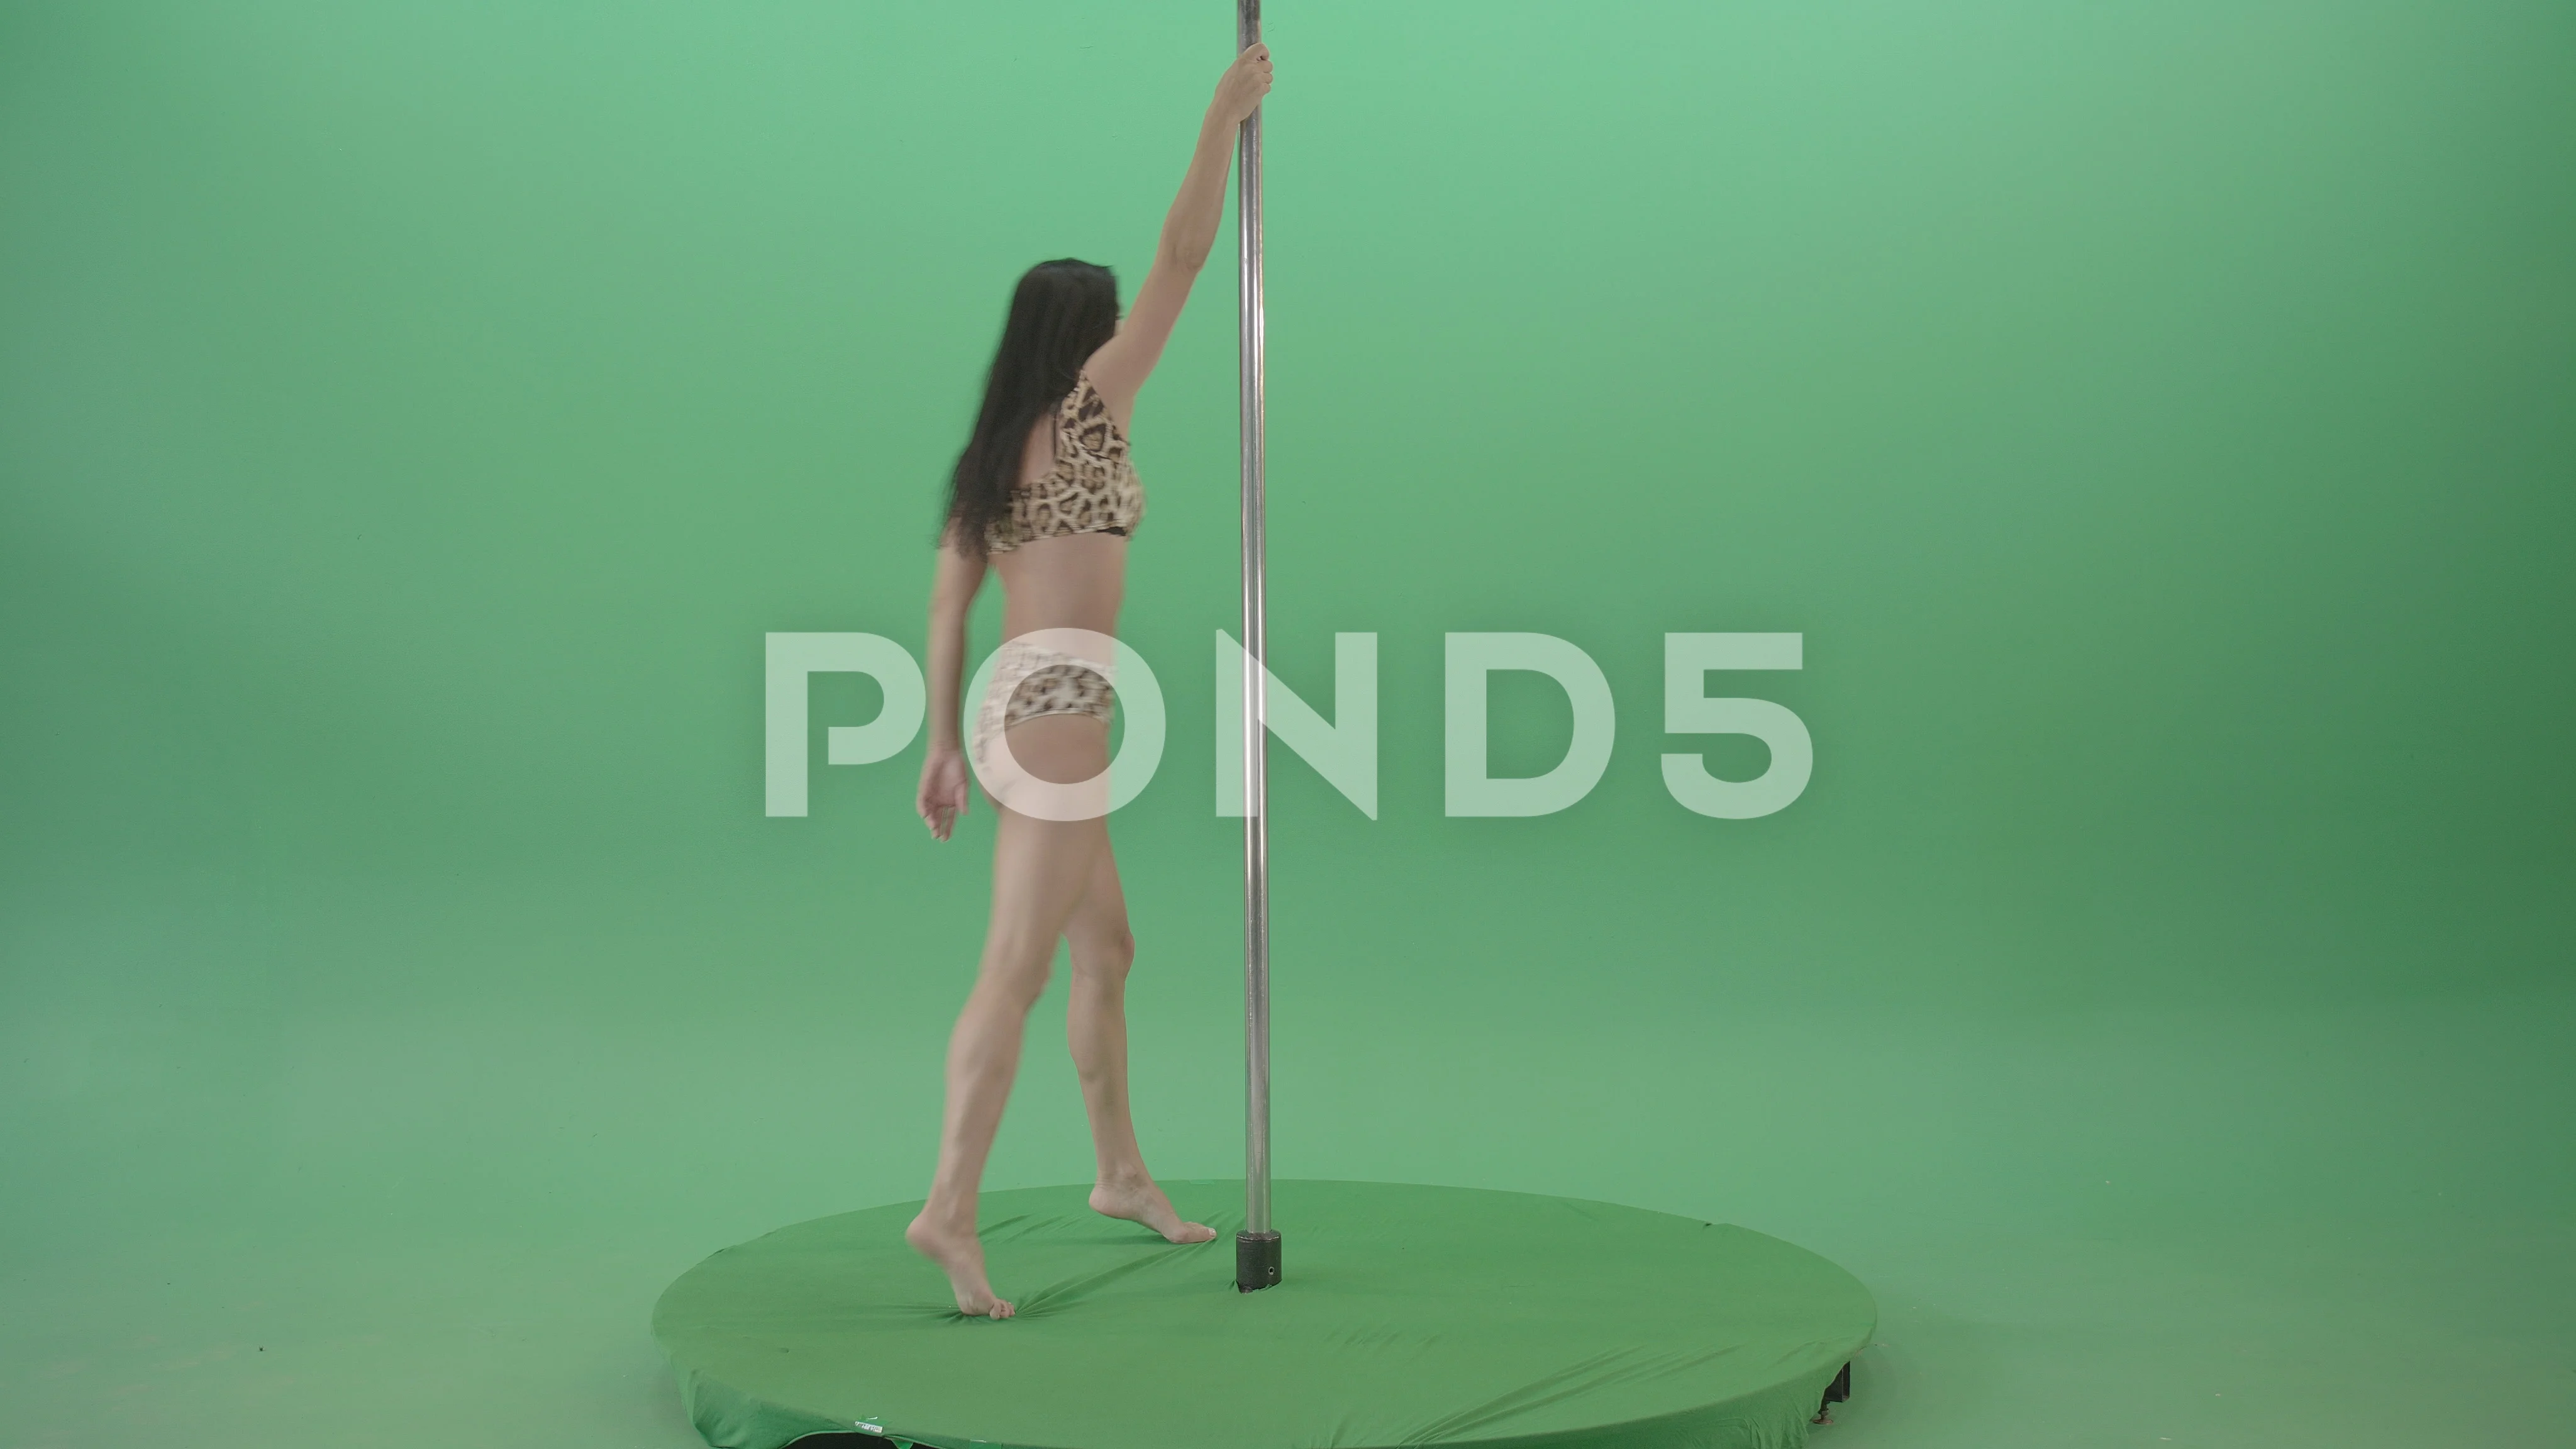 Pole Dancing In White Panties - Pole Dancer Green Screen Stock Video Footage | Royalty Free Pole Dancer  Green Screen Videos | Pond5